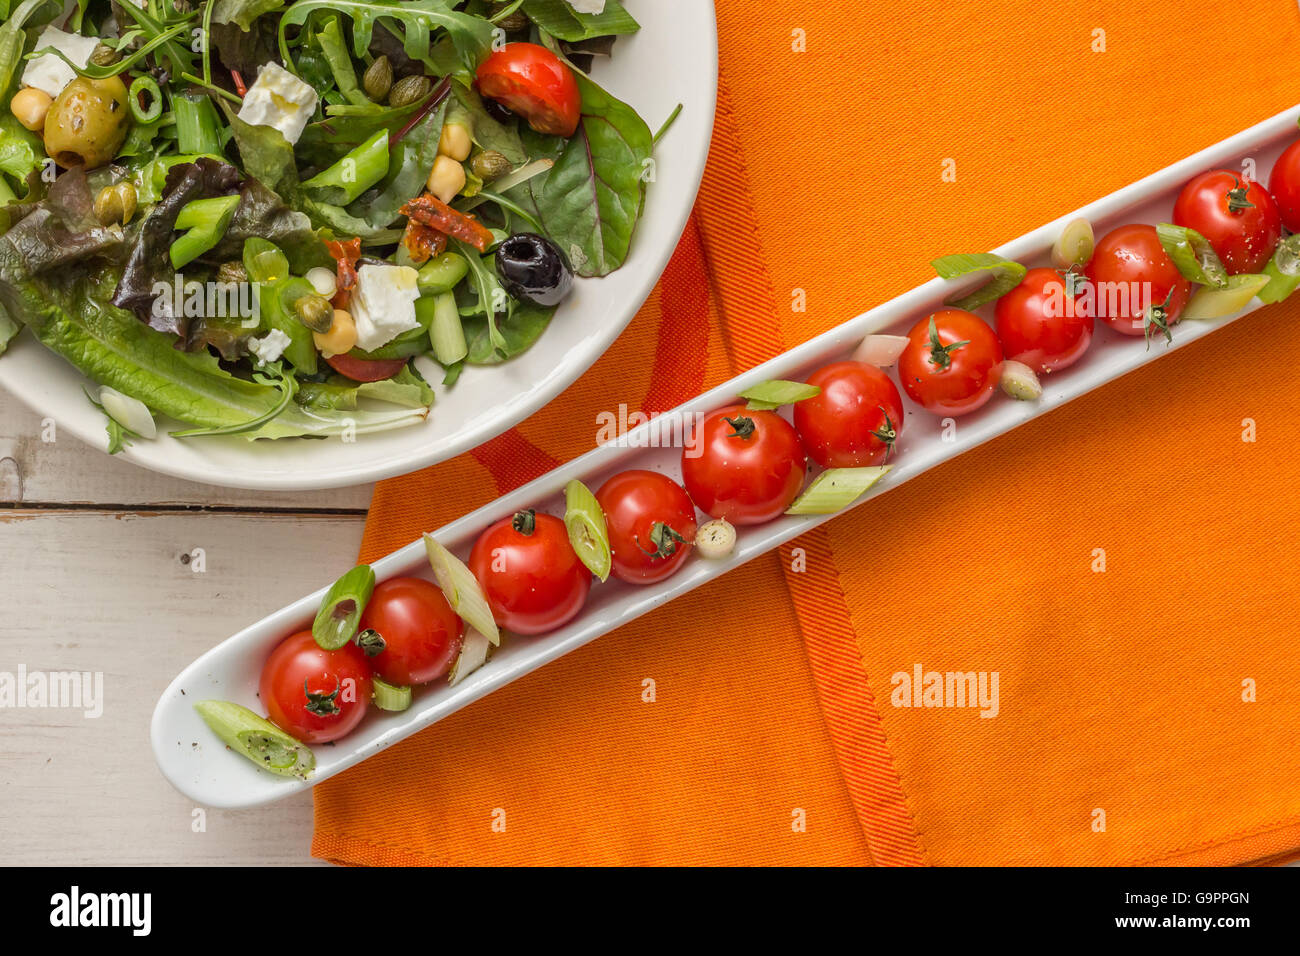 Long dish with cherry tomatoes and a green salad on a white wooden table Stock Photo